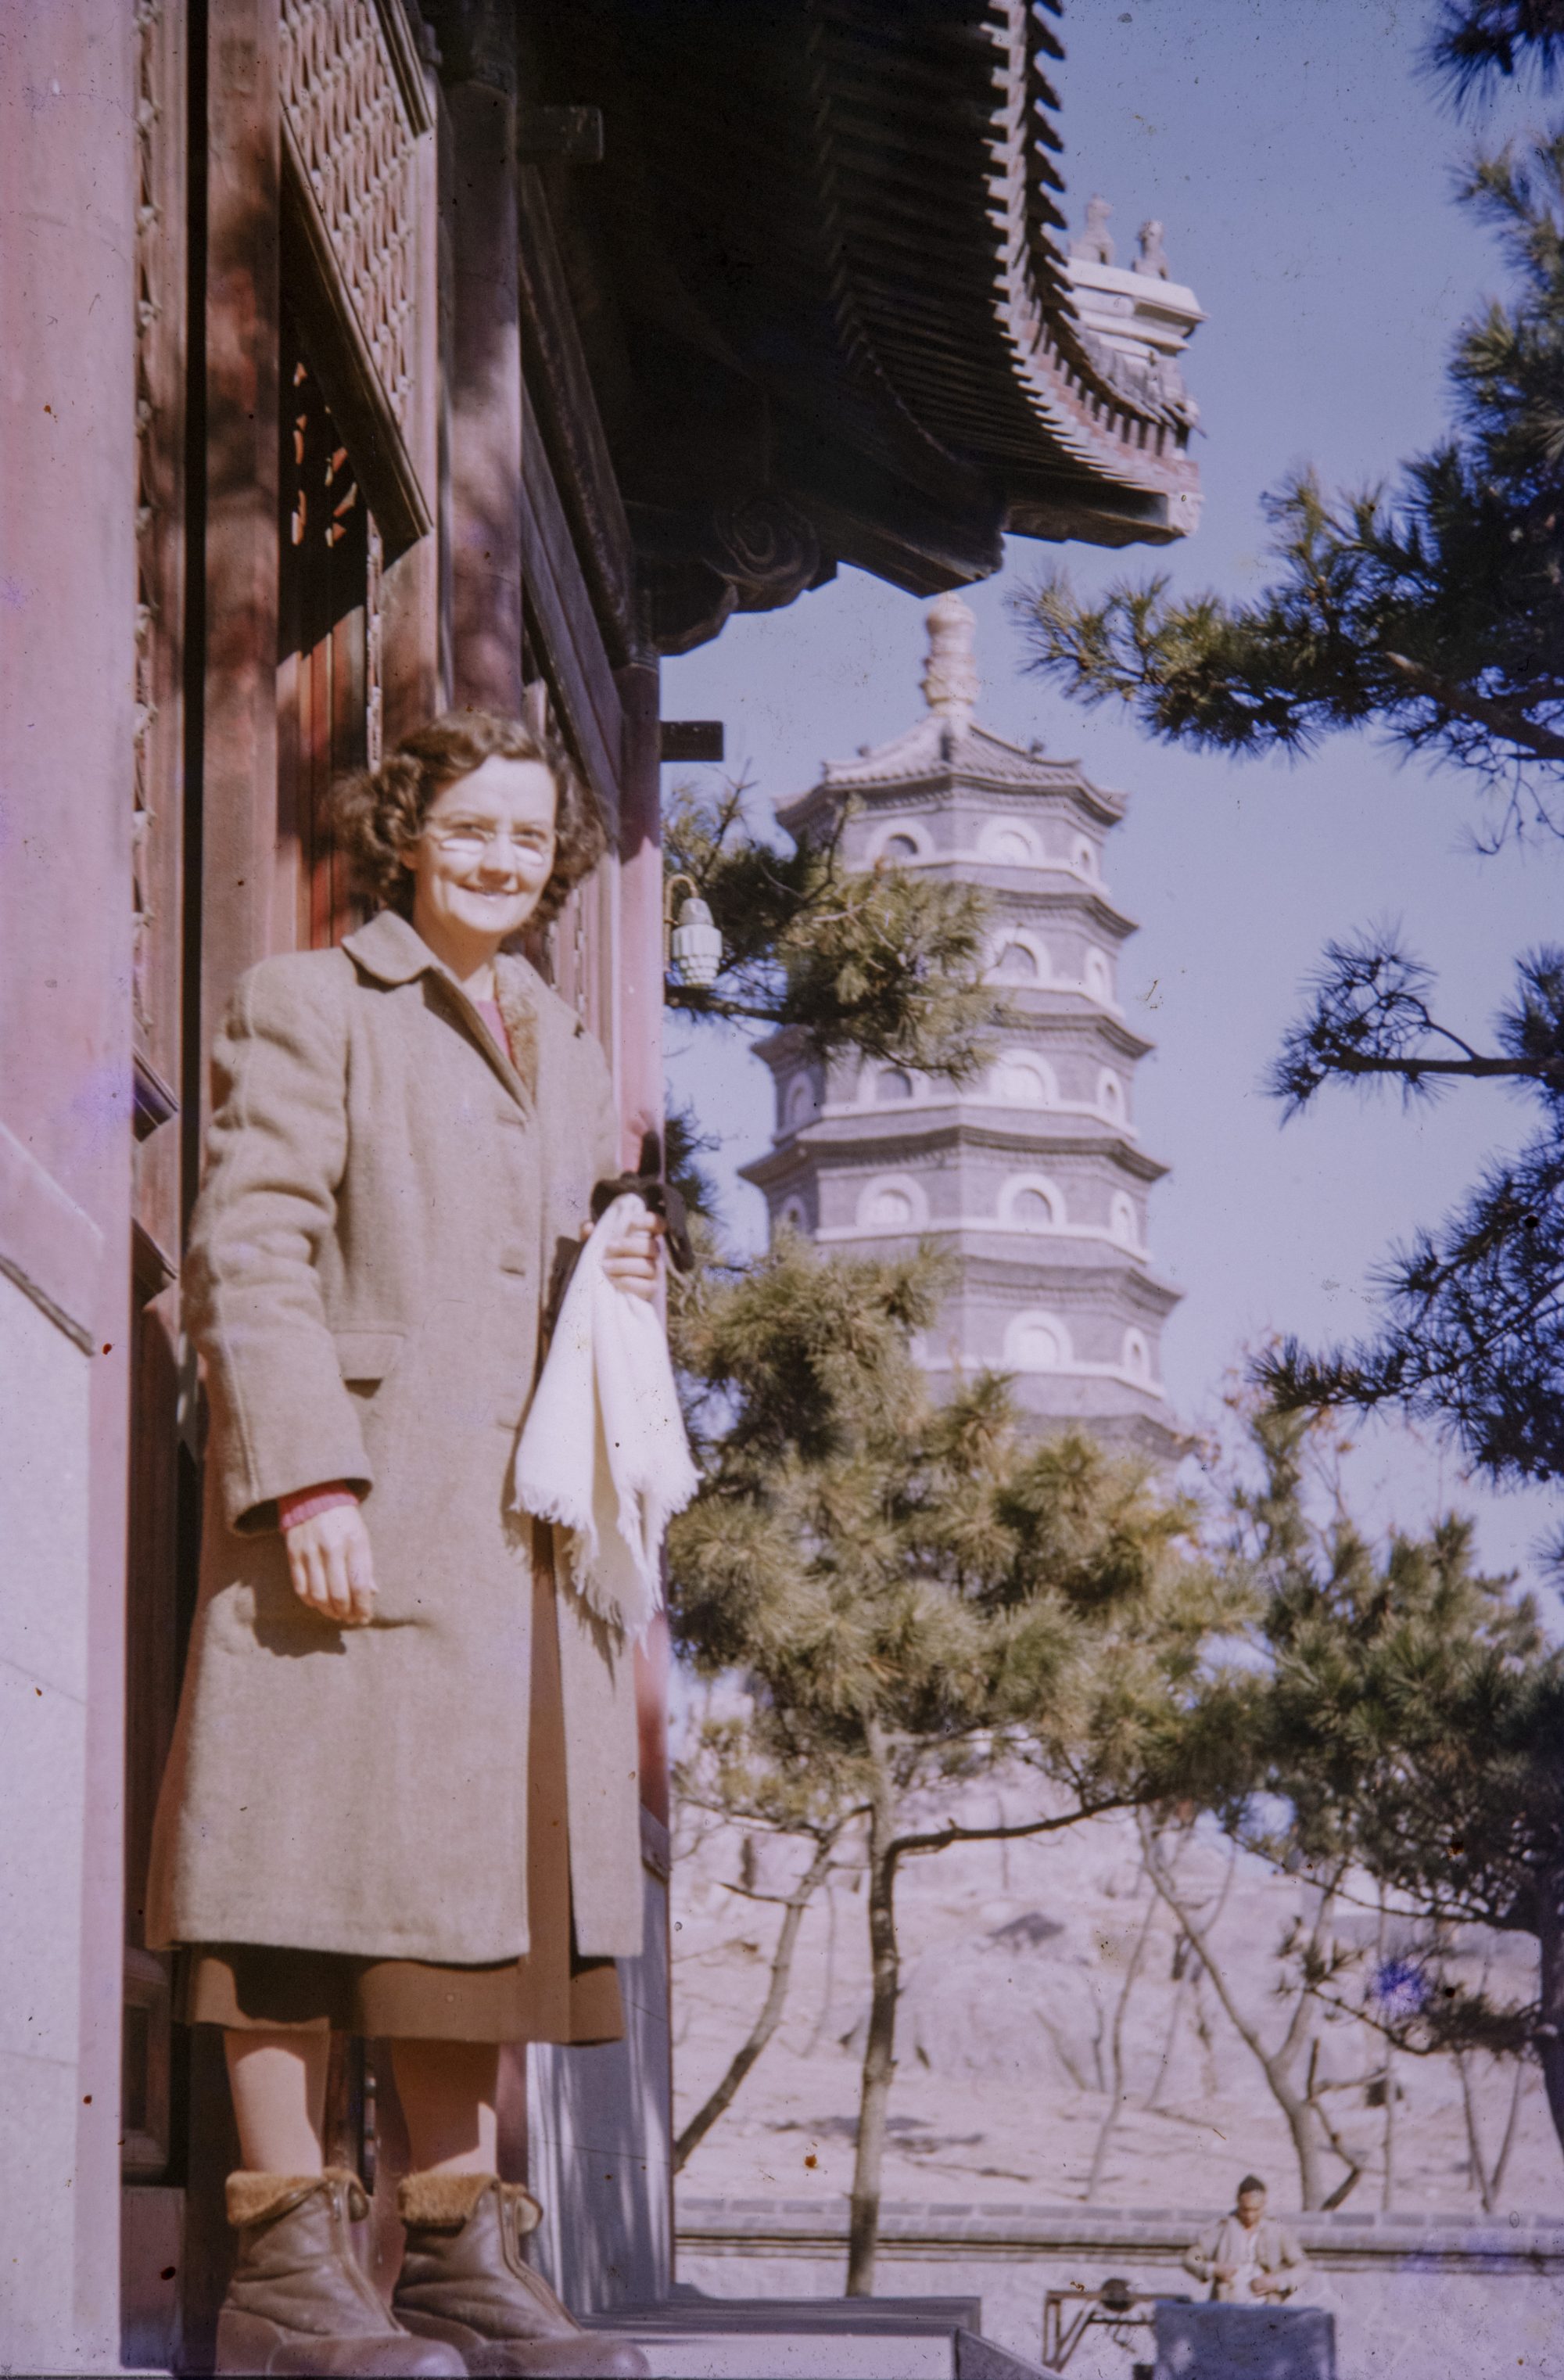 Catherine Walker visits the pagoda and temple at Tsingtao, China, in 1949.